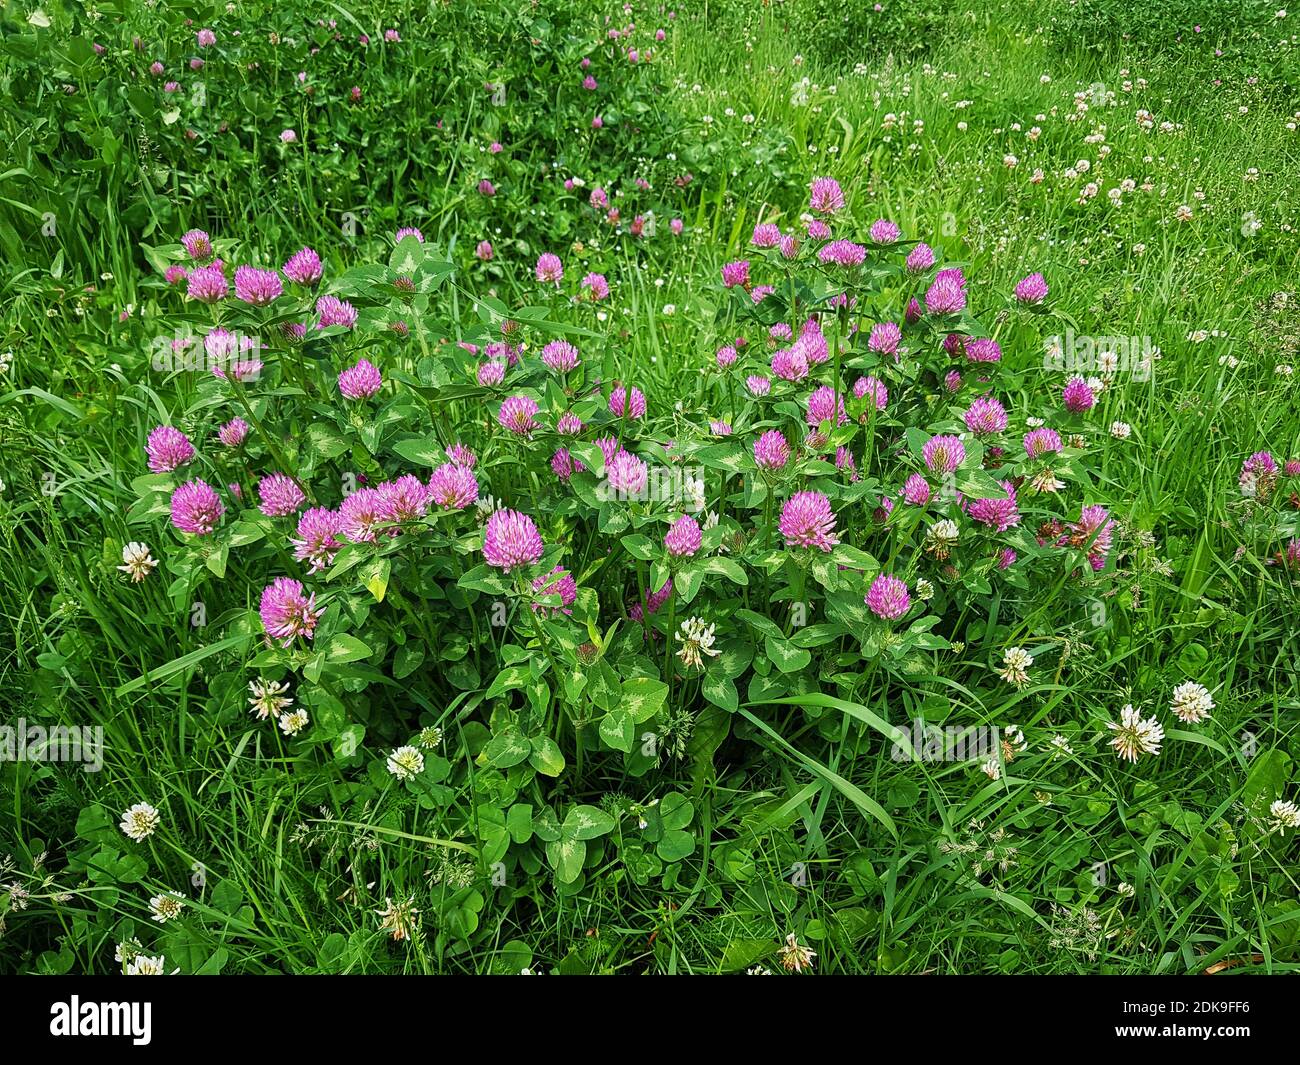 Flower meadow with clover Stock Photo